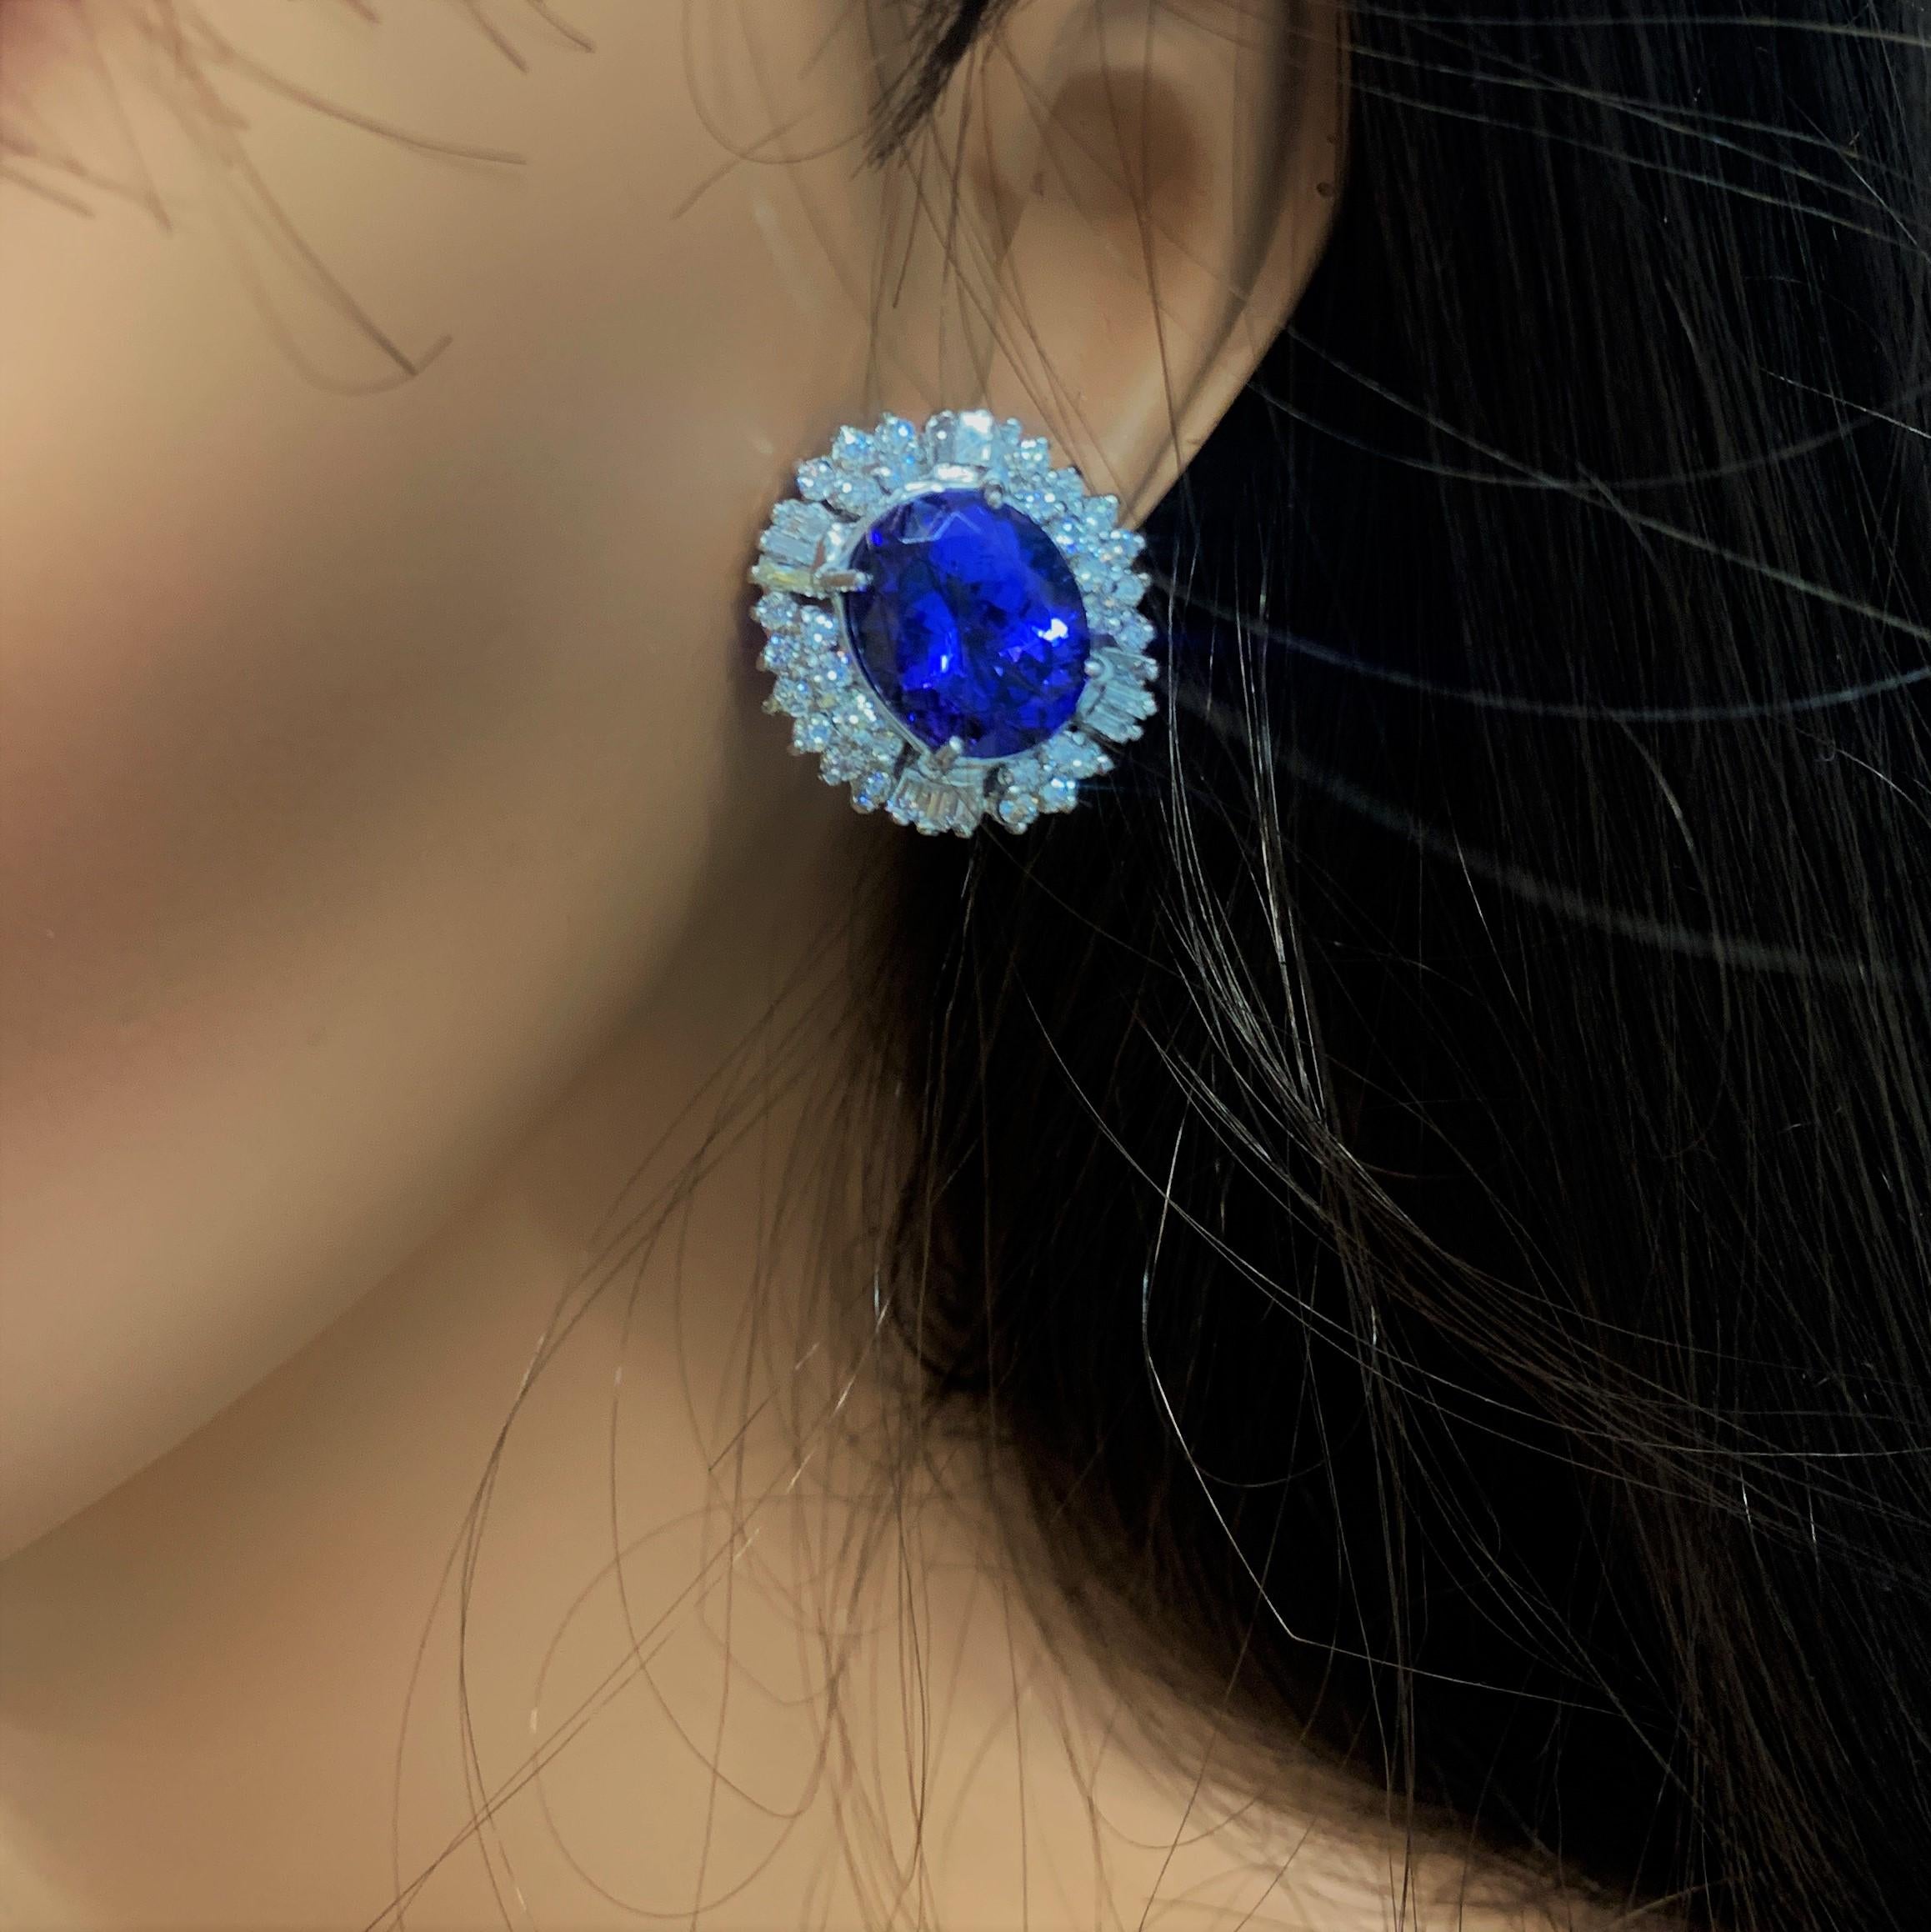 Elegance has never had such a big, bold look that is made to get noticed. These exclusive brightly polished 18k white gold anniversary earrings feature two oval tanzanite's prong set in the center totaling 15.46 carats of color and vibrancy. These A